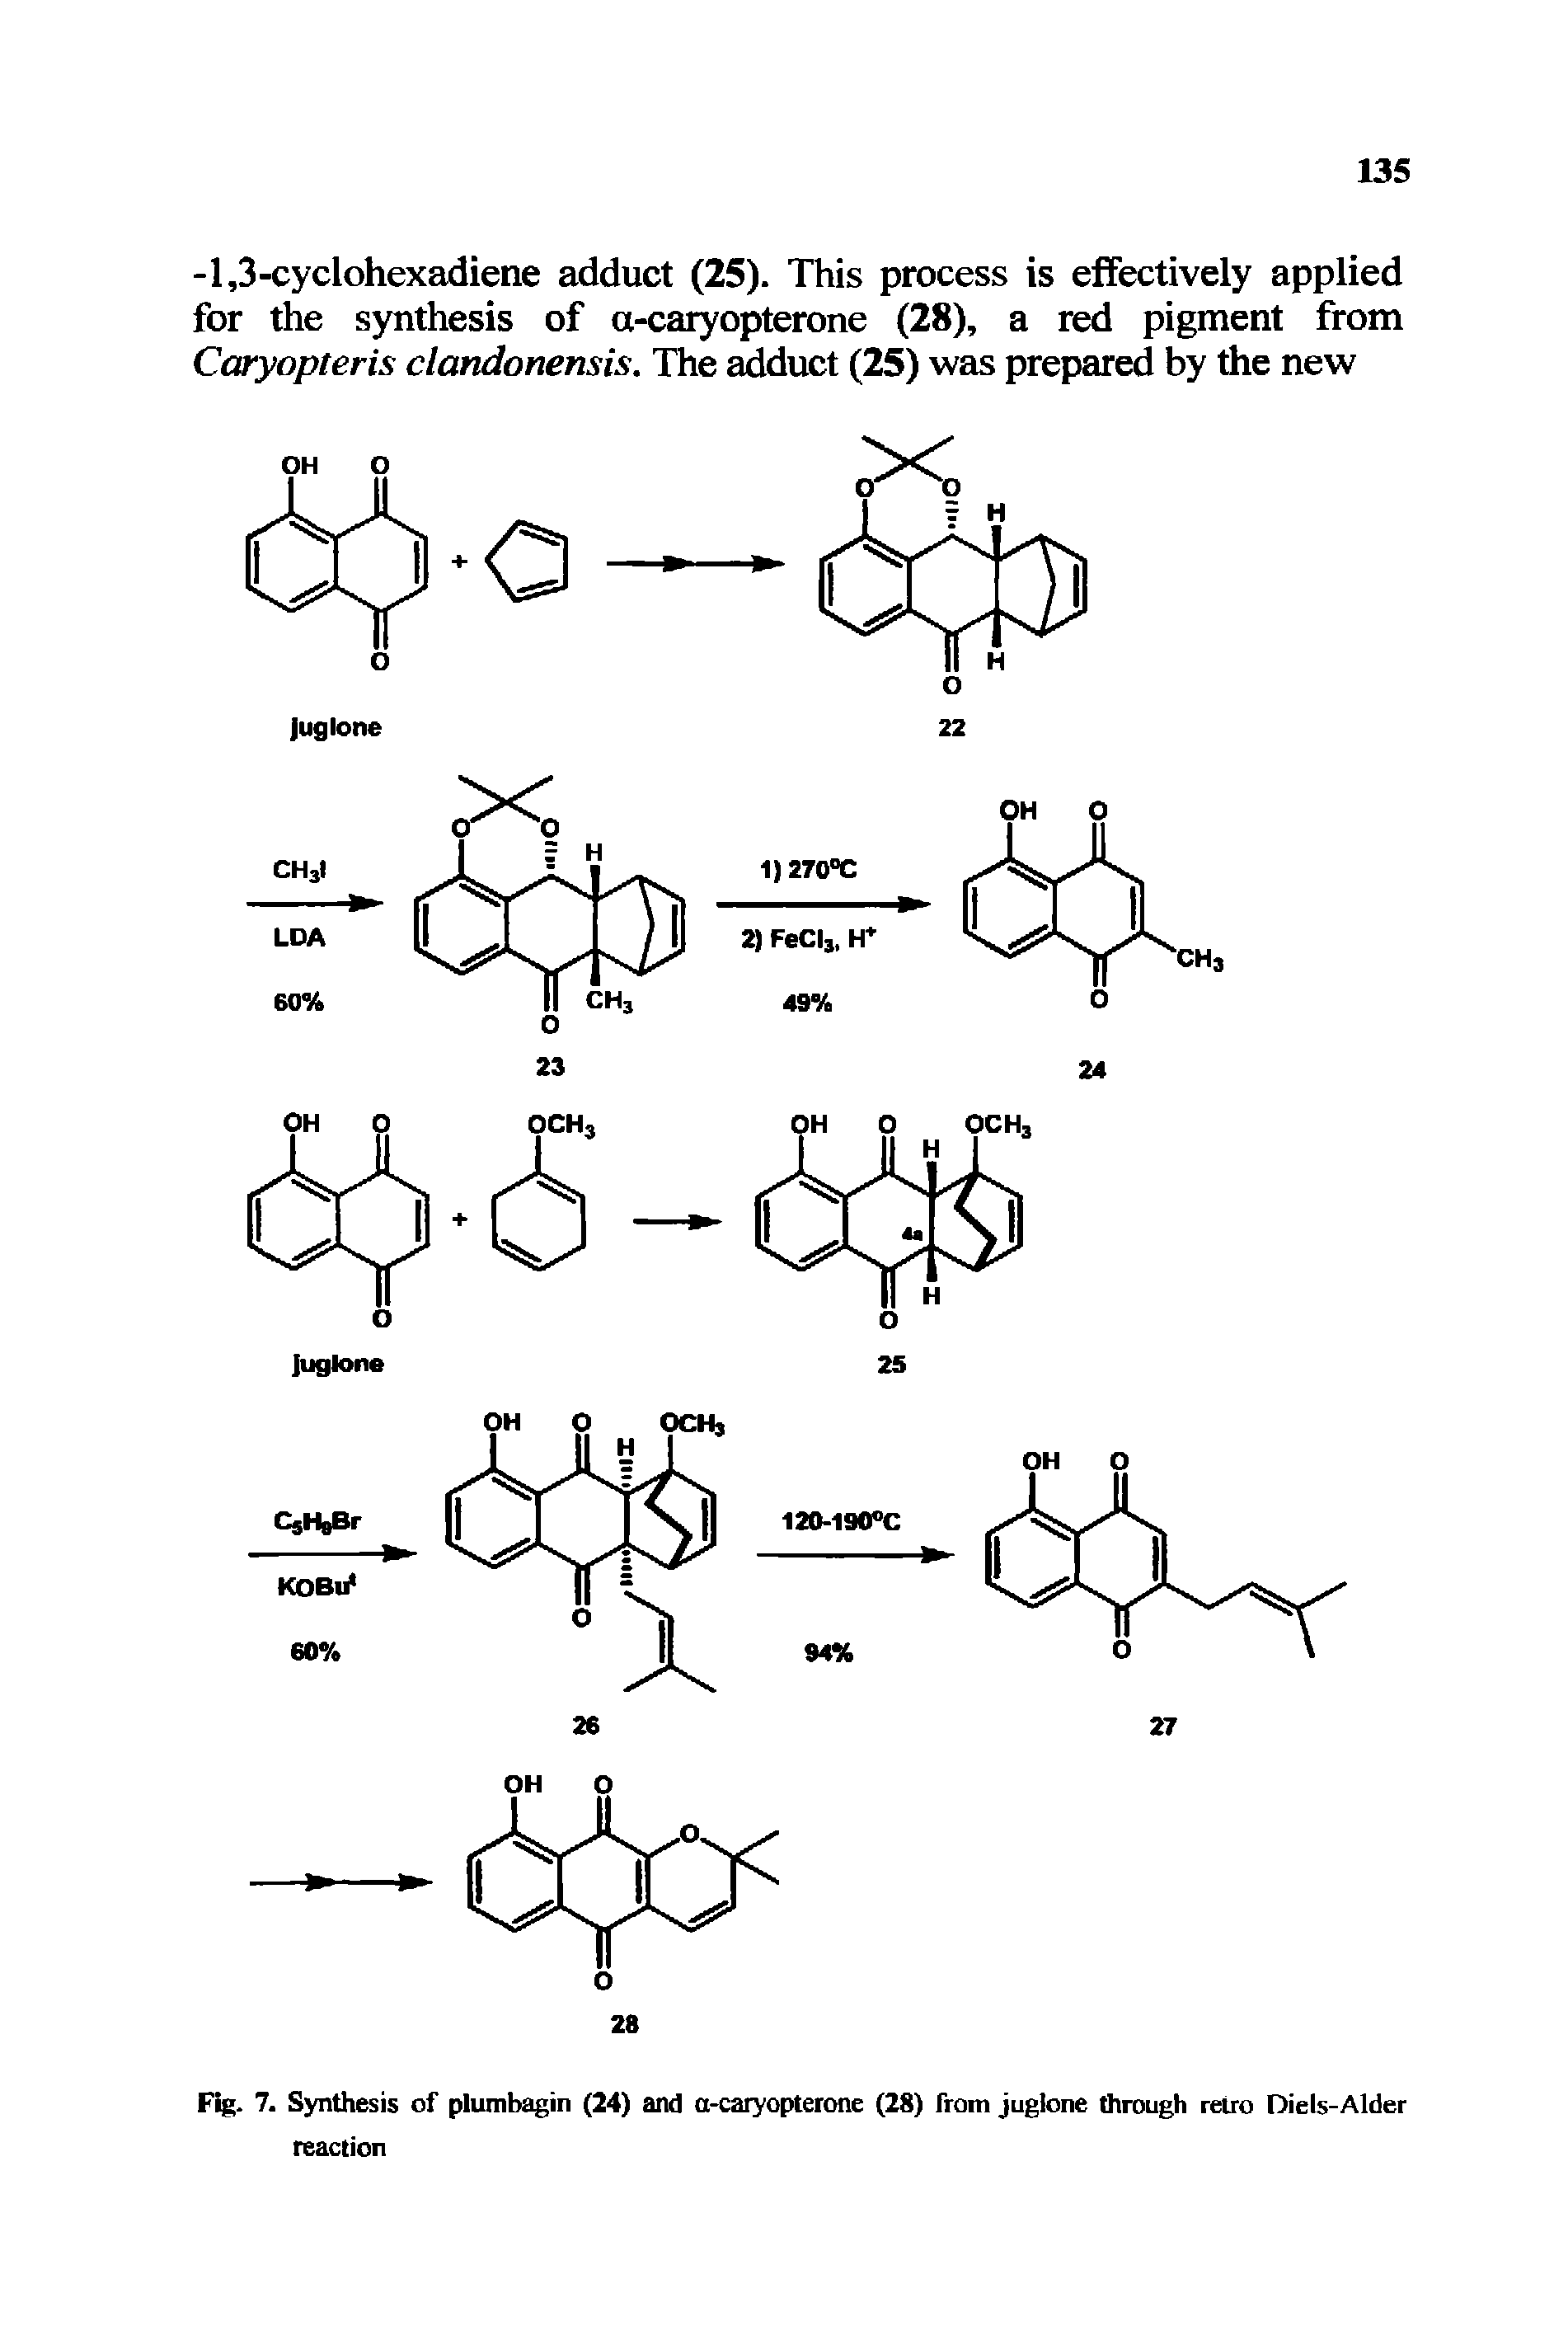 Fig. 7. Synthesis of plumbagin (24) and a-caryopterone (28) from juglone through retro Diels-Alder reaction...